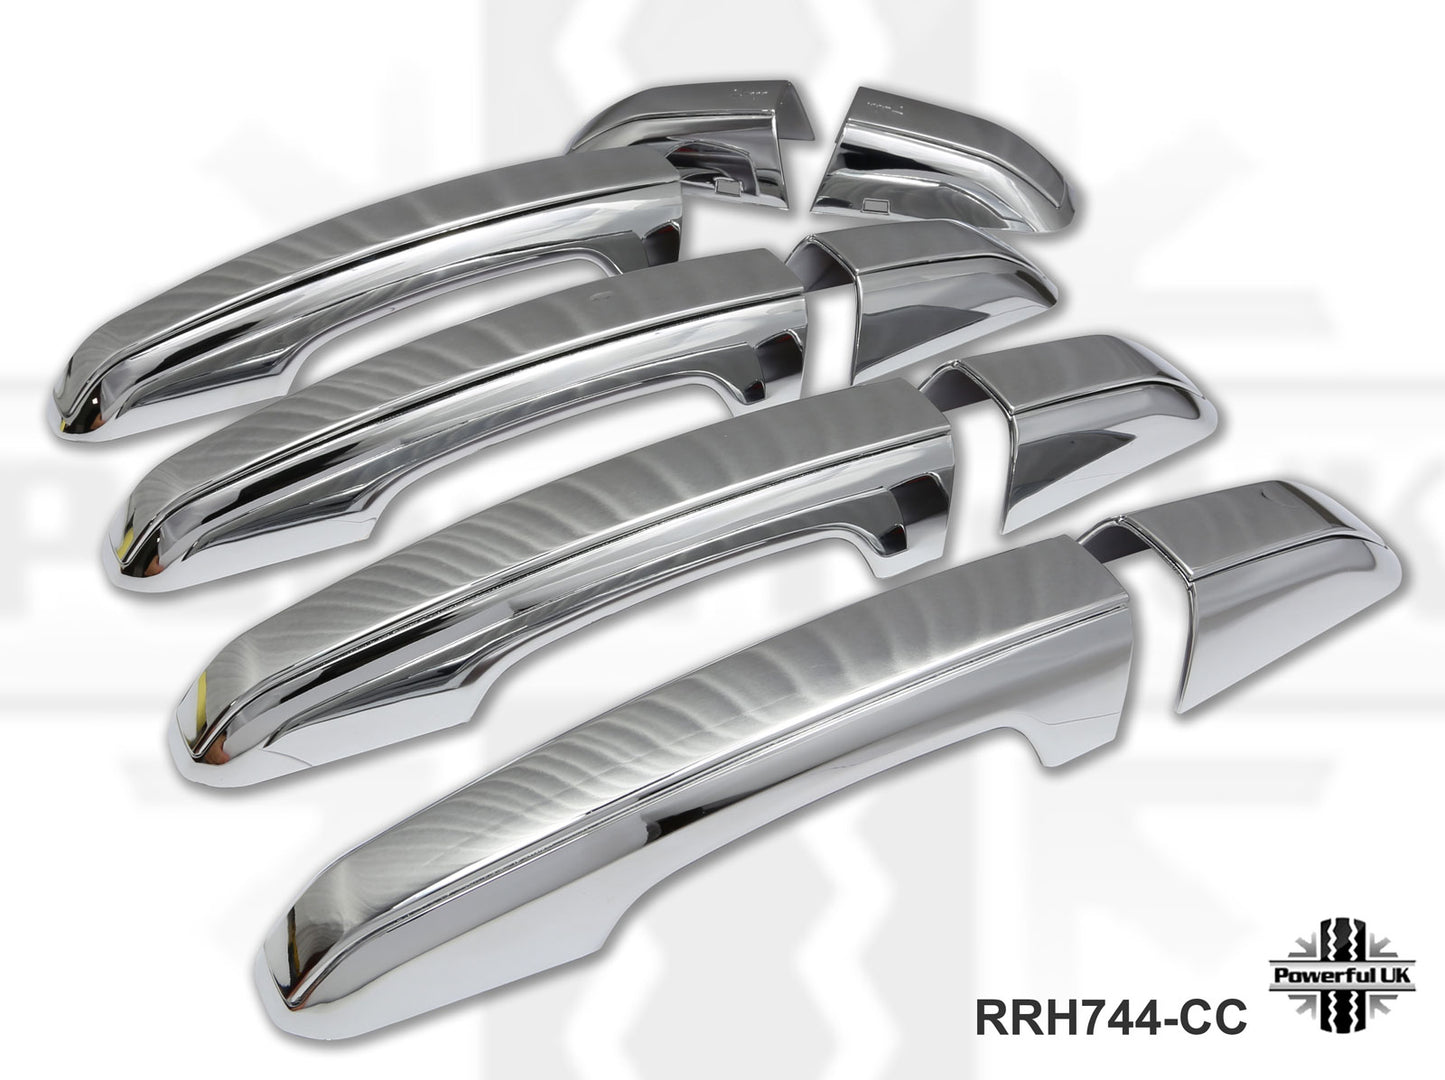 2pc "Autobiography Style" Door Handle Covers for Range Rover Sport L494 - Chrome/Chrome